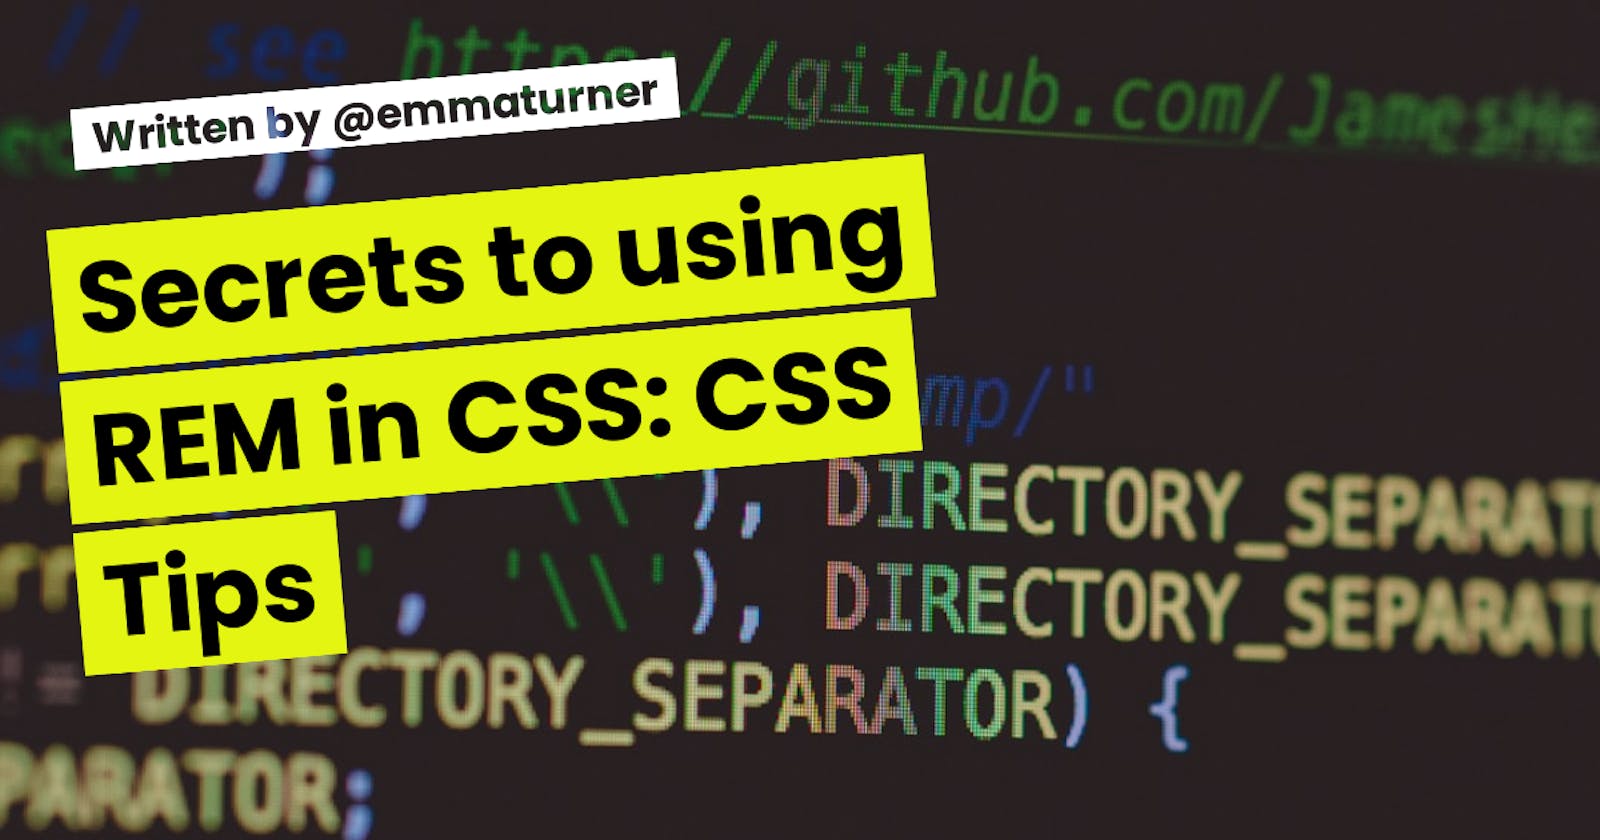 Secrets to using REM in CSS: CSS Tips